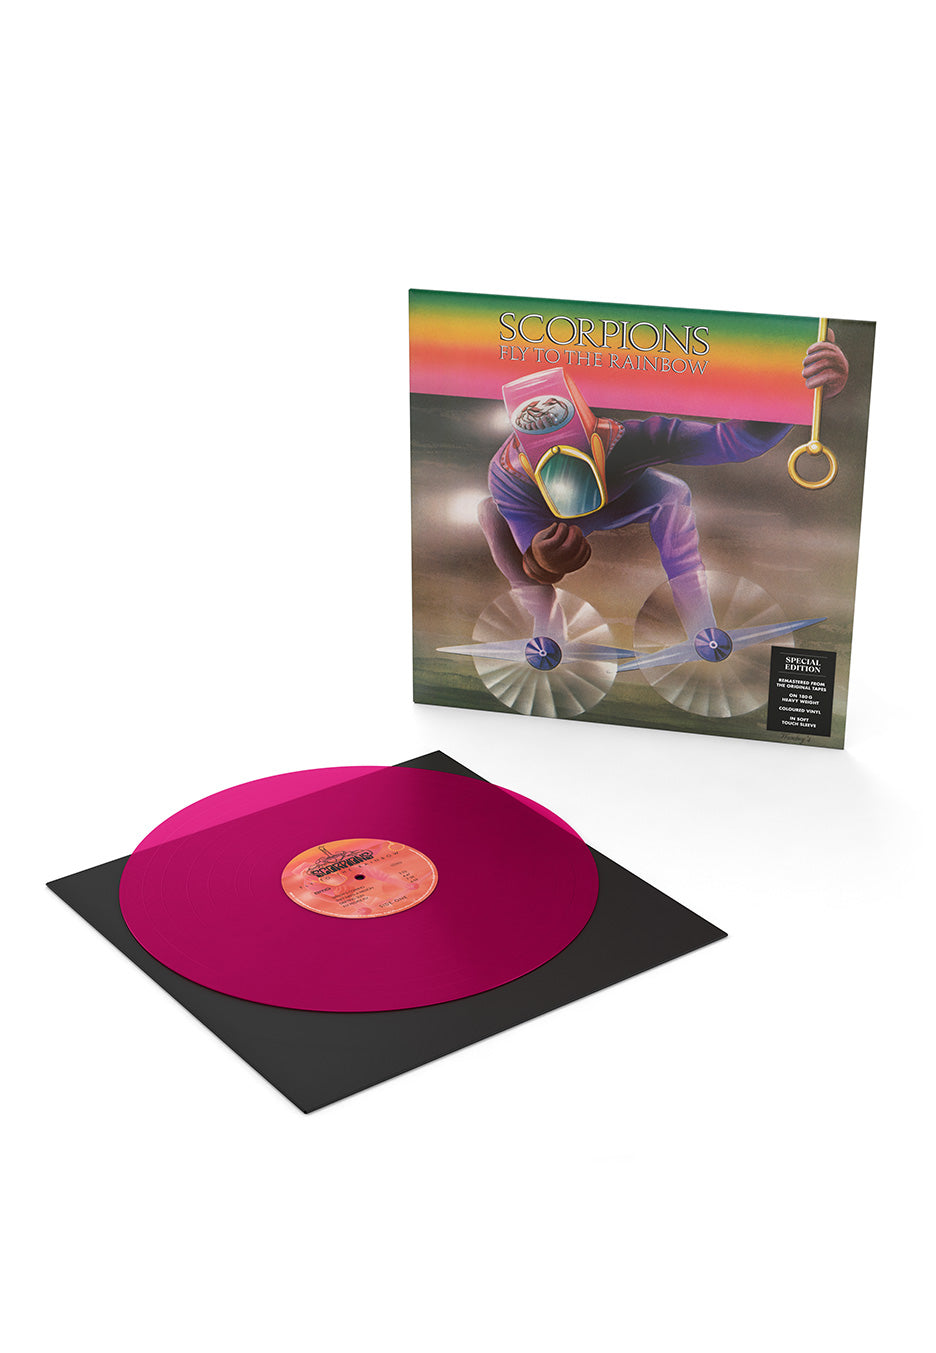 Scorpions - Fly To The Rainbow Transparent Violet - Colored Vinyl